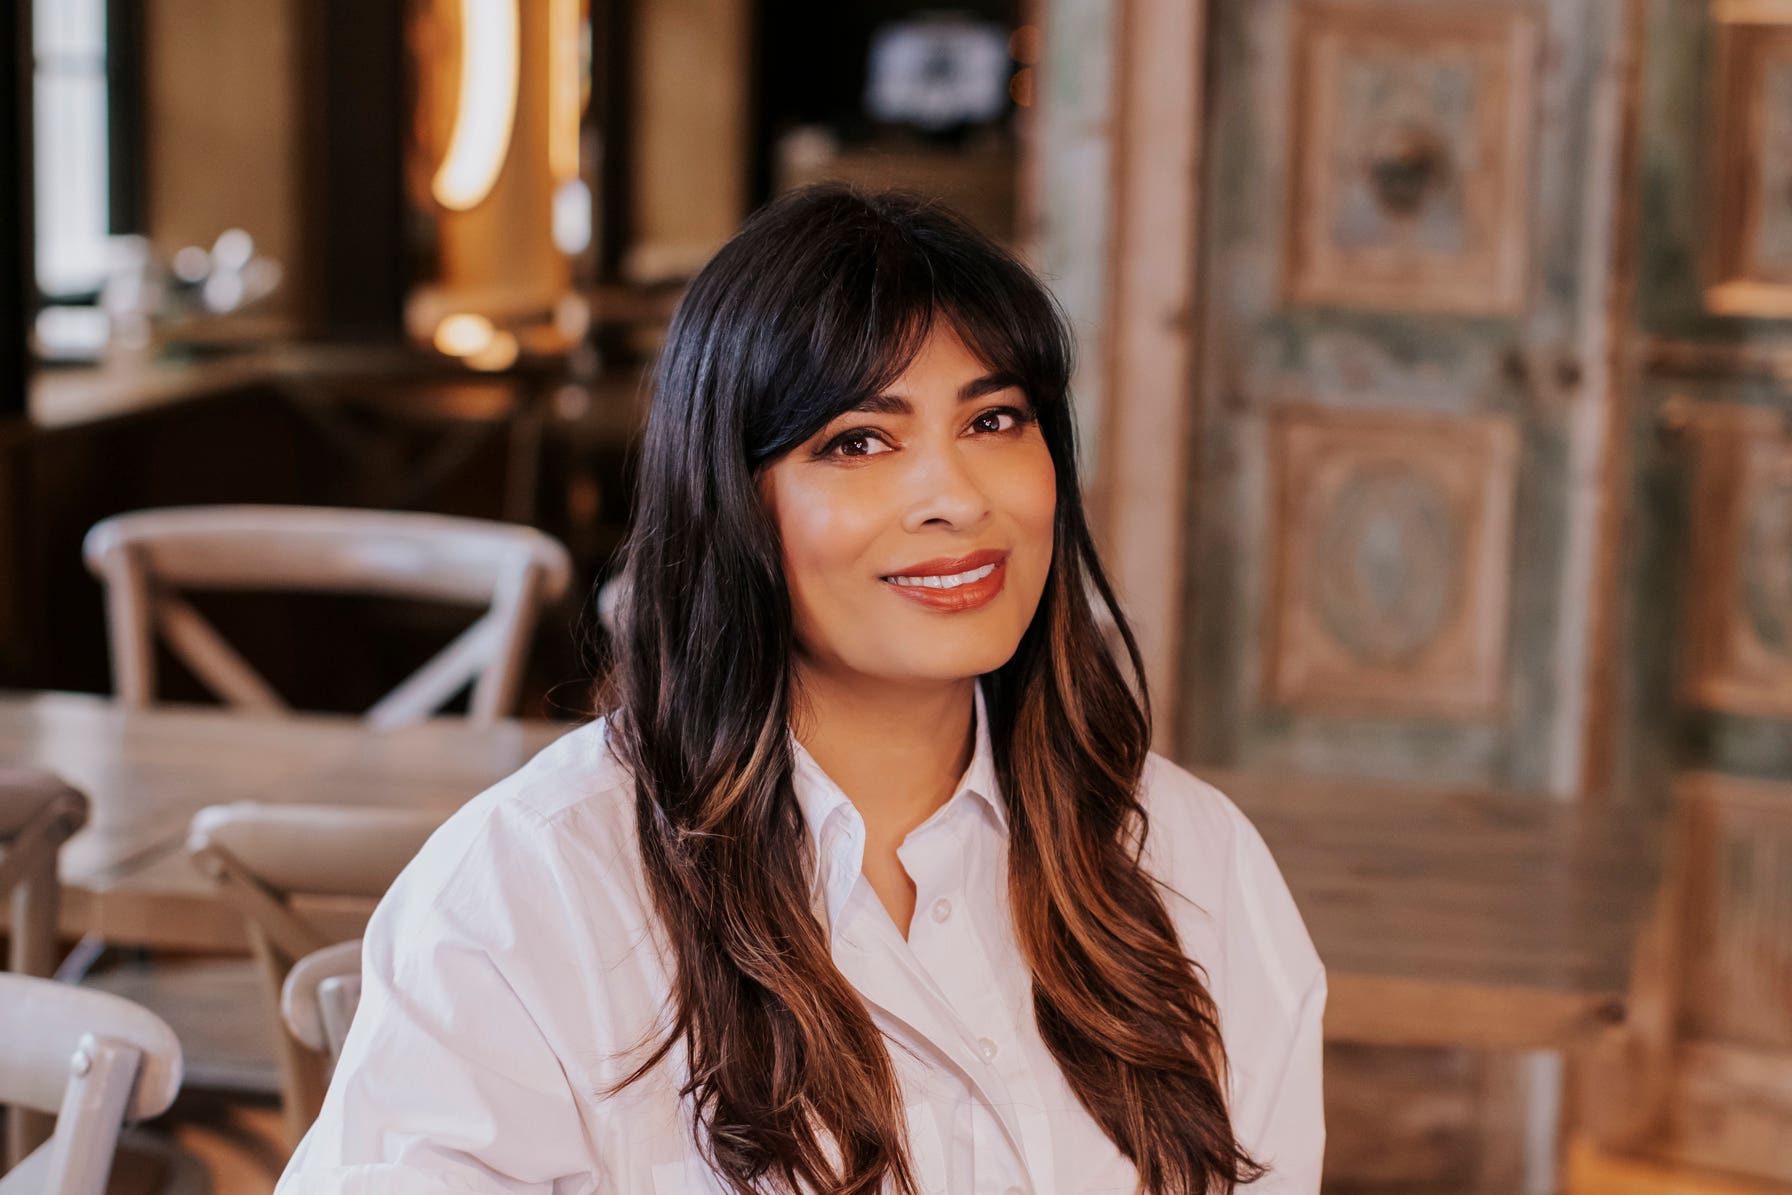 The TV chef gave up her 20-year career as a child protection barrister to open her first restaurant, Mowgli, 10 years ago